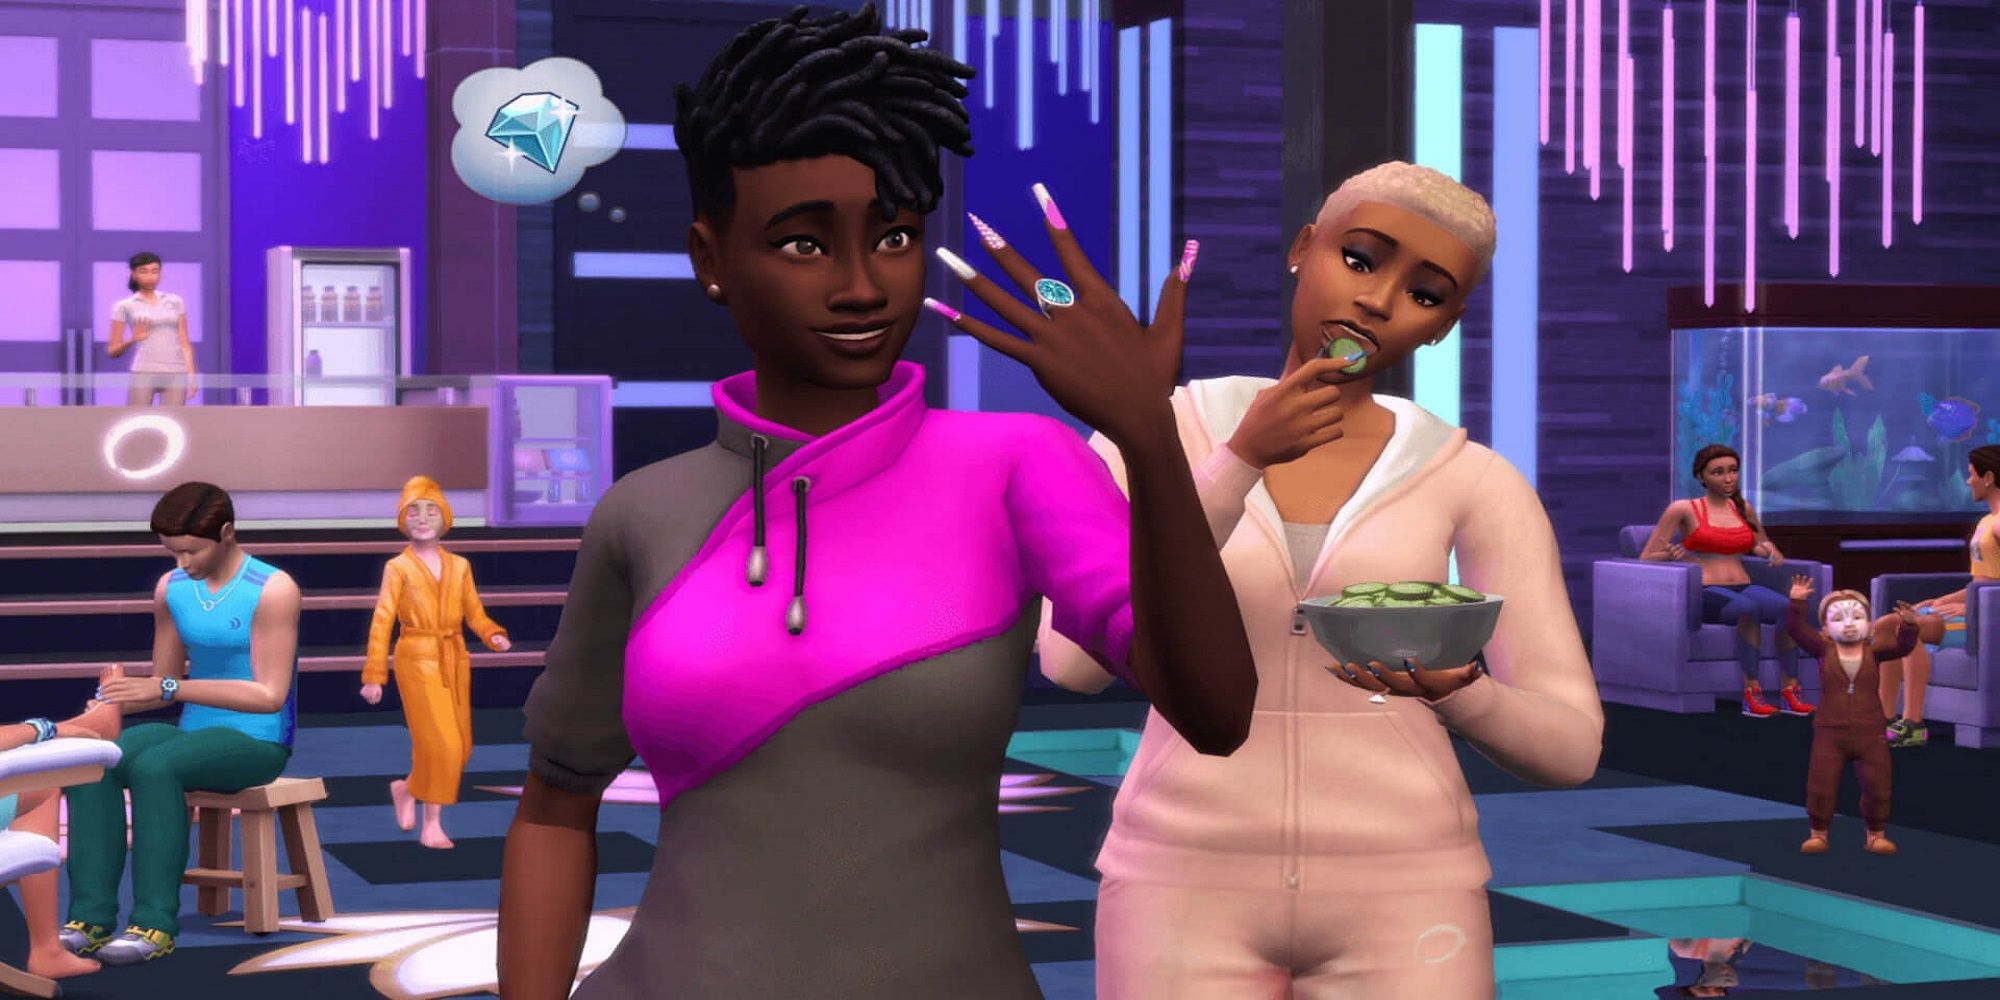 The Sims 4 Spa Day Refresh Nails